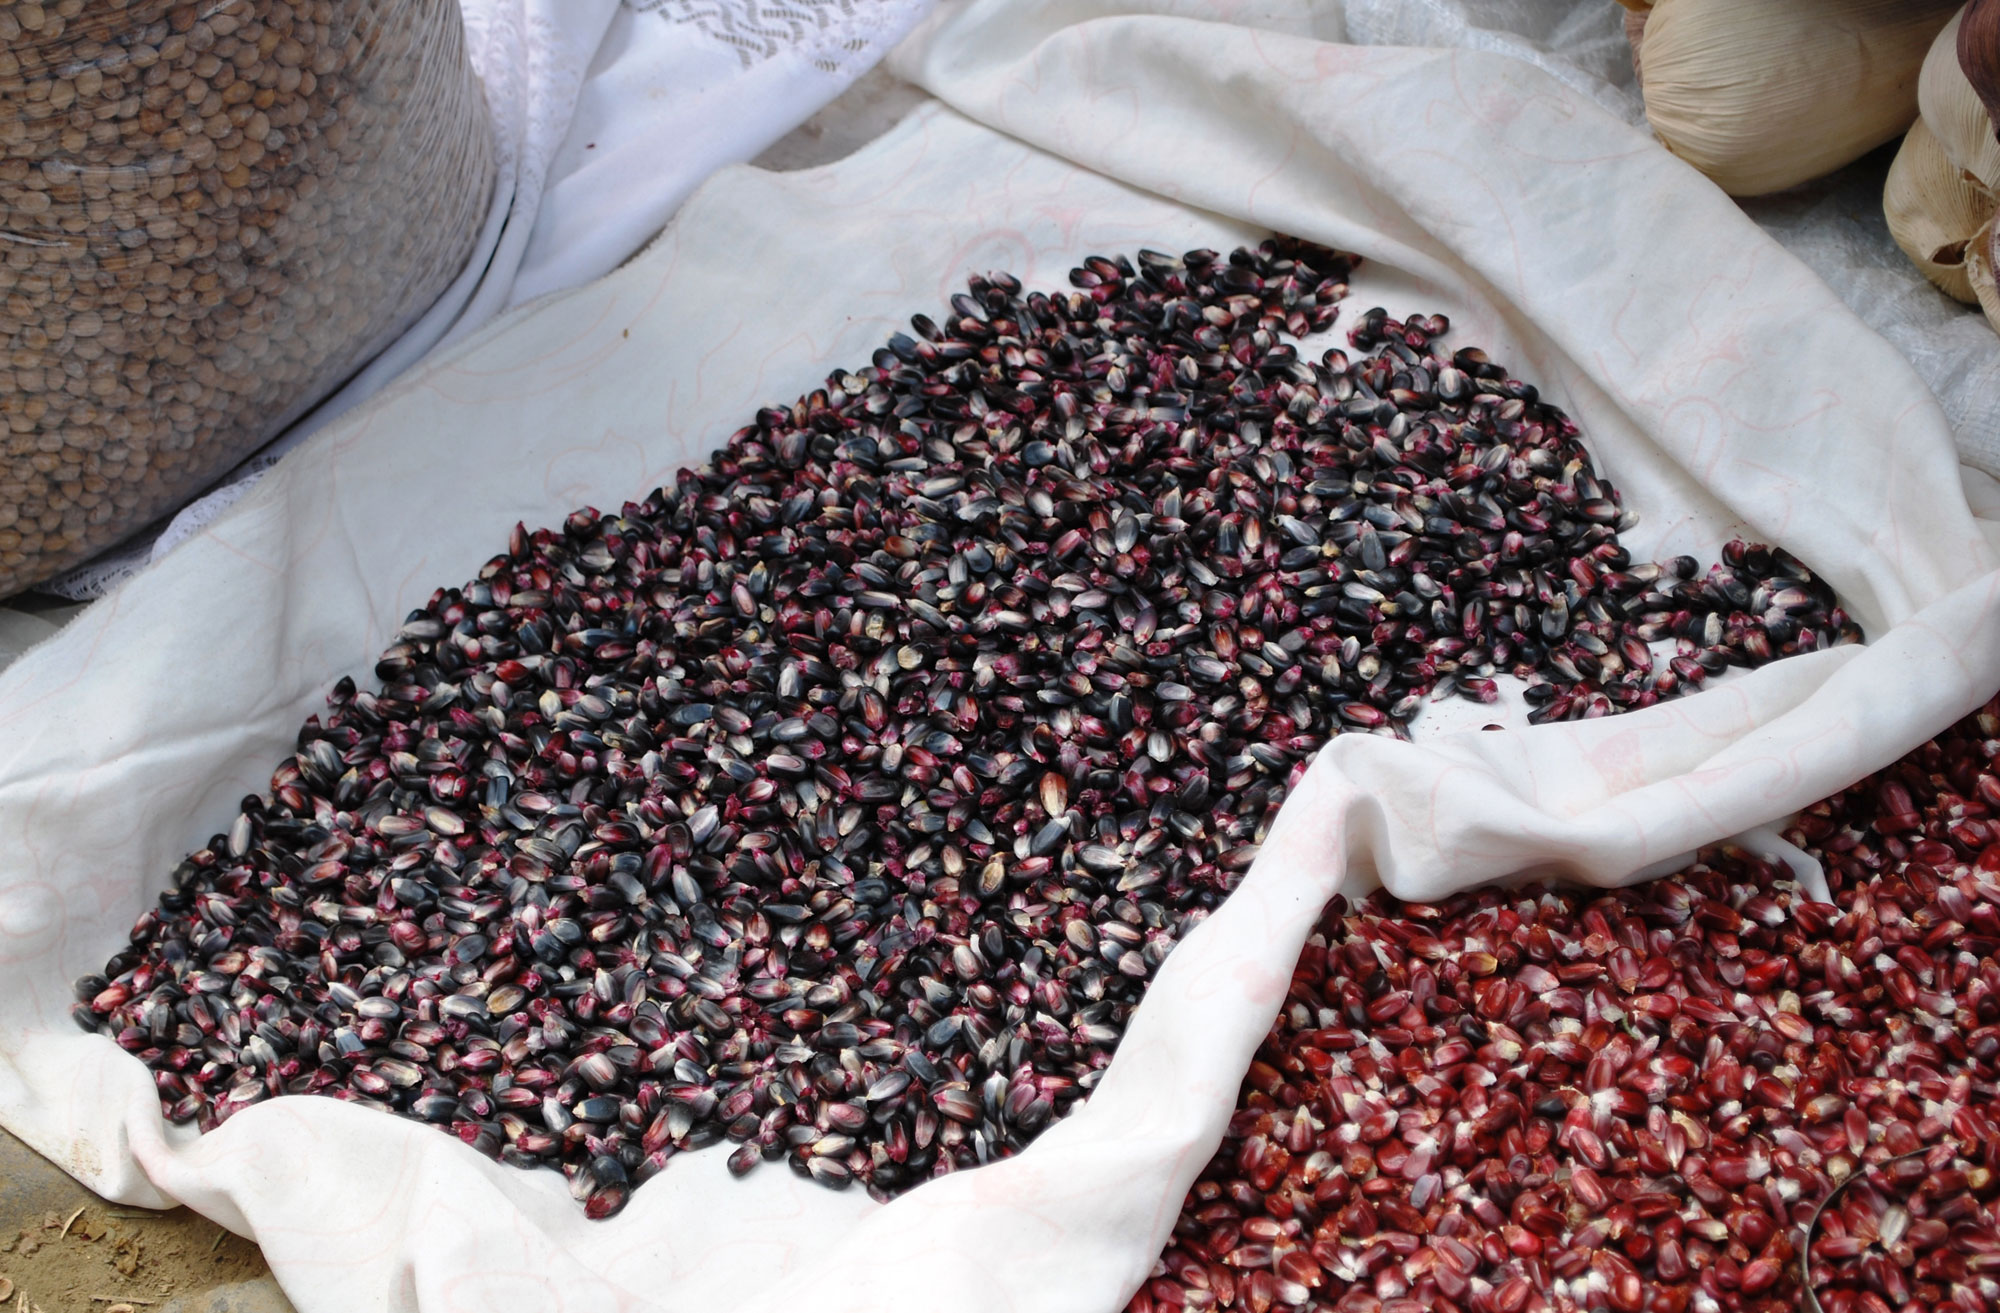 Photograph of blue maize kernels and red maize kernels spread out on white cloths in a market in Mexico.